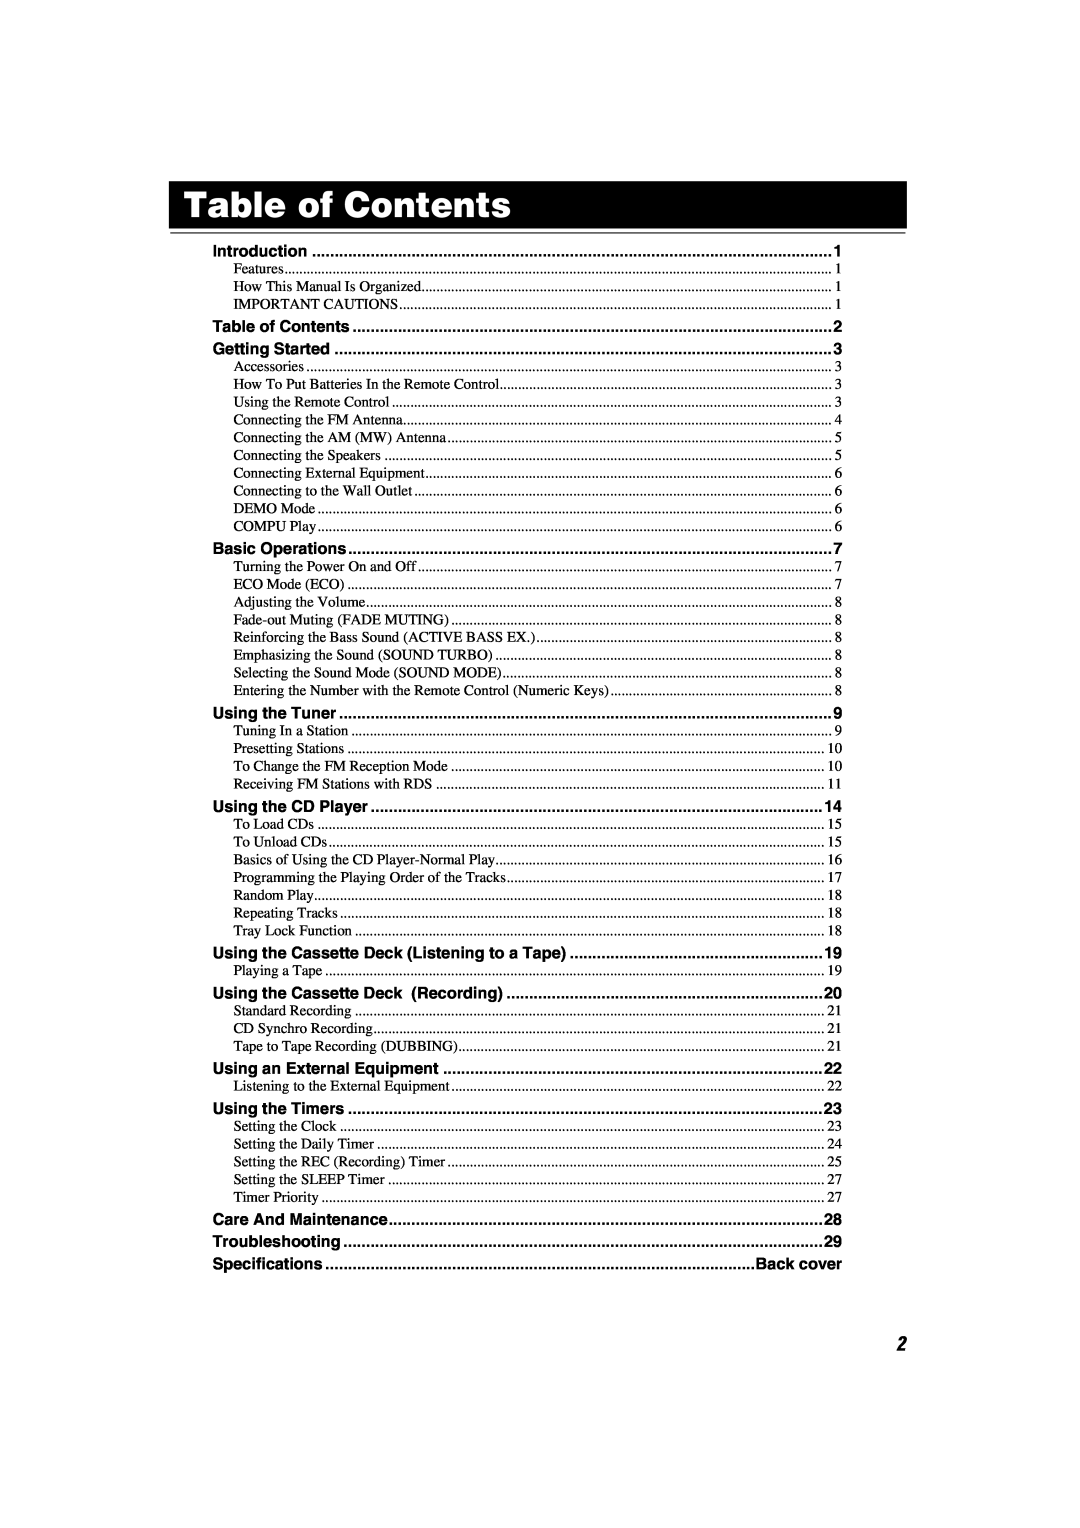 JVC 0303NYMCREBETEN, LVT1014-003A, CA-MXKA6 manual Table of Contents, Specifications 